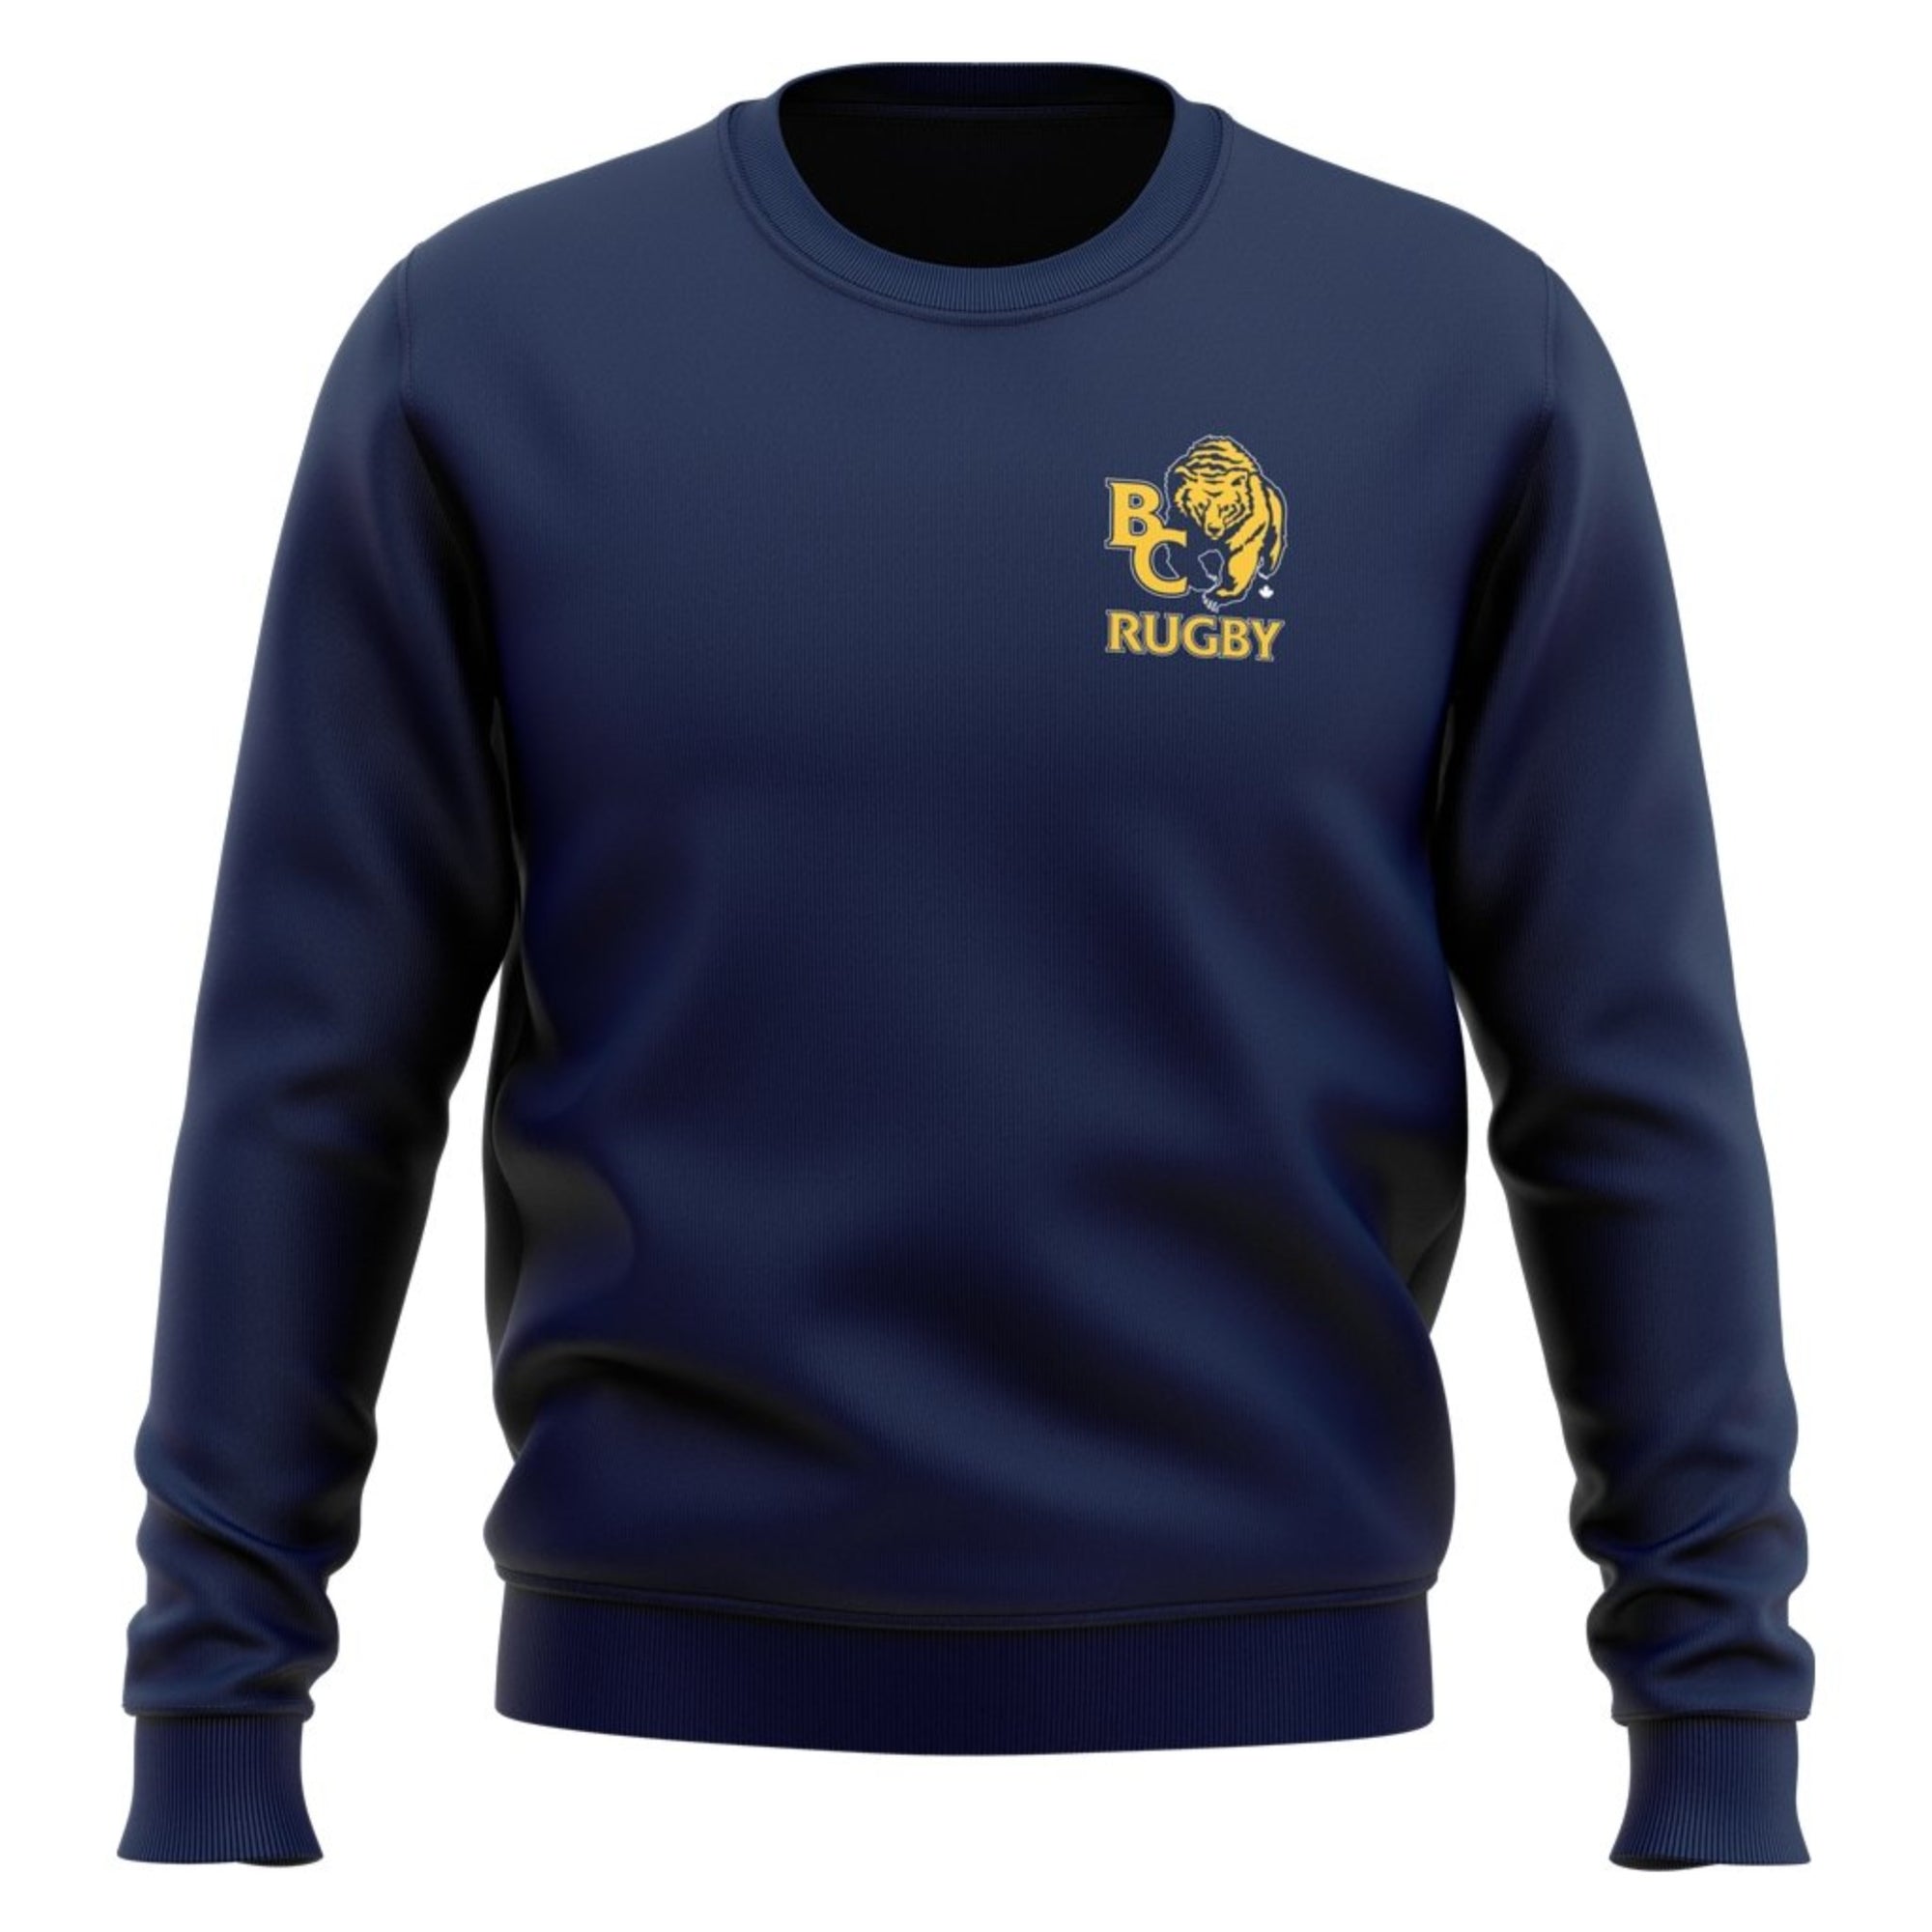 BC Rugby 2021 "Small Logo Team" Crew Neck Sweater - Adult Unisex - www.therugbyshop.com www.therugbyshop.com ADULT UNISEX / NAVY / S XIX Brands HOODIES BC Rugby 2021 "Small Logo Team" Crew Neck Sweater - Adult Unisex